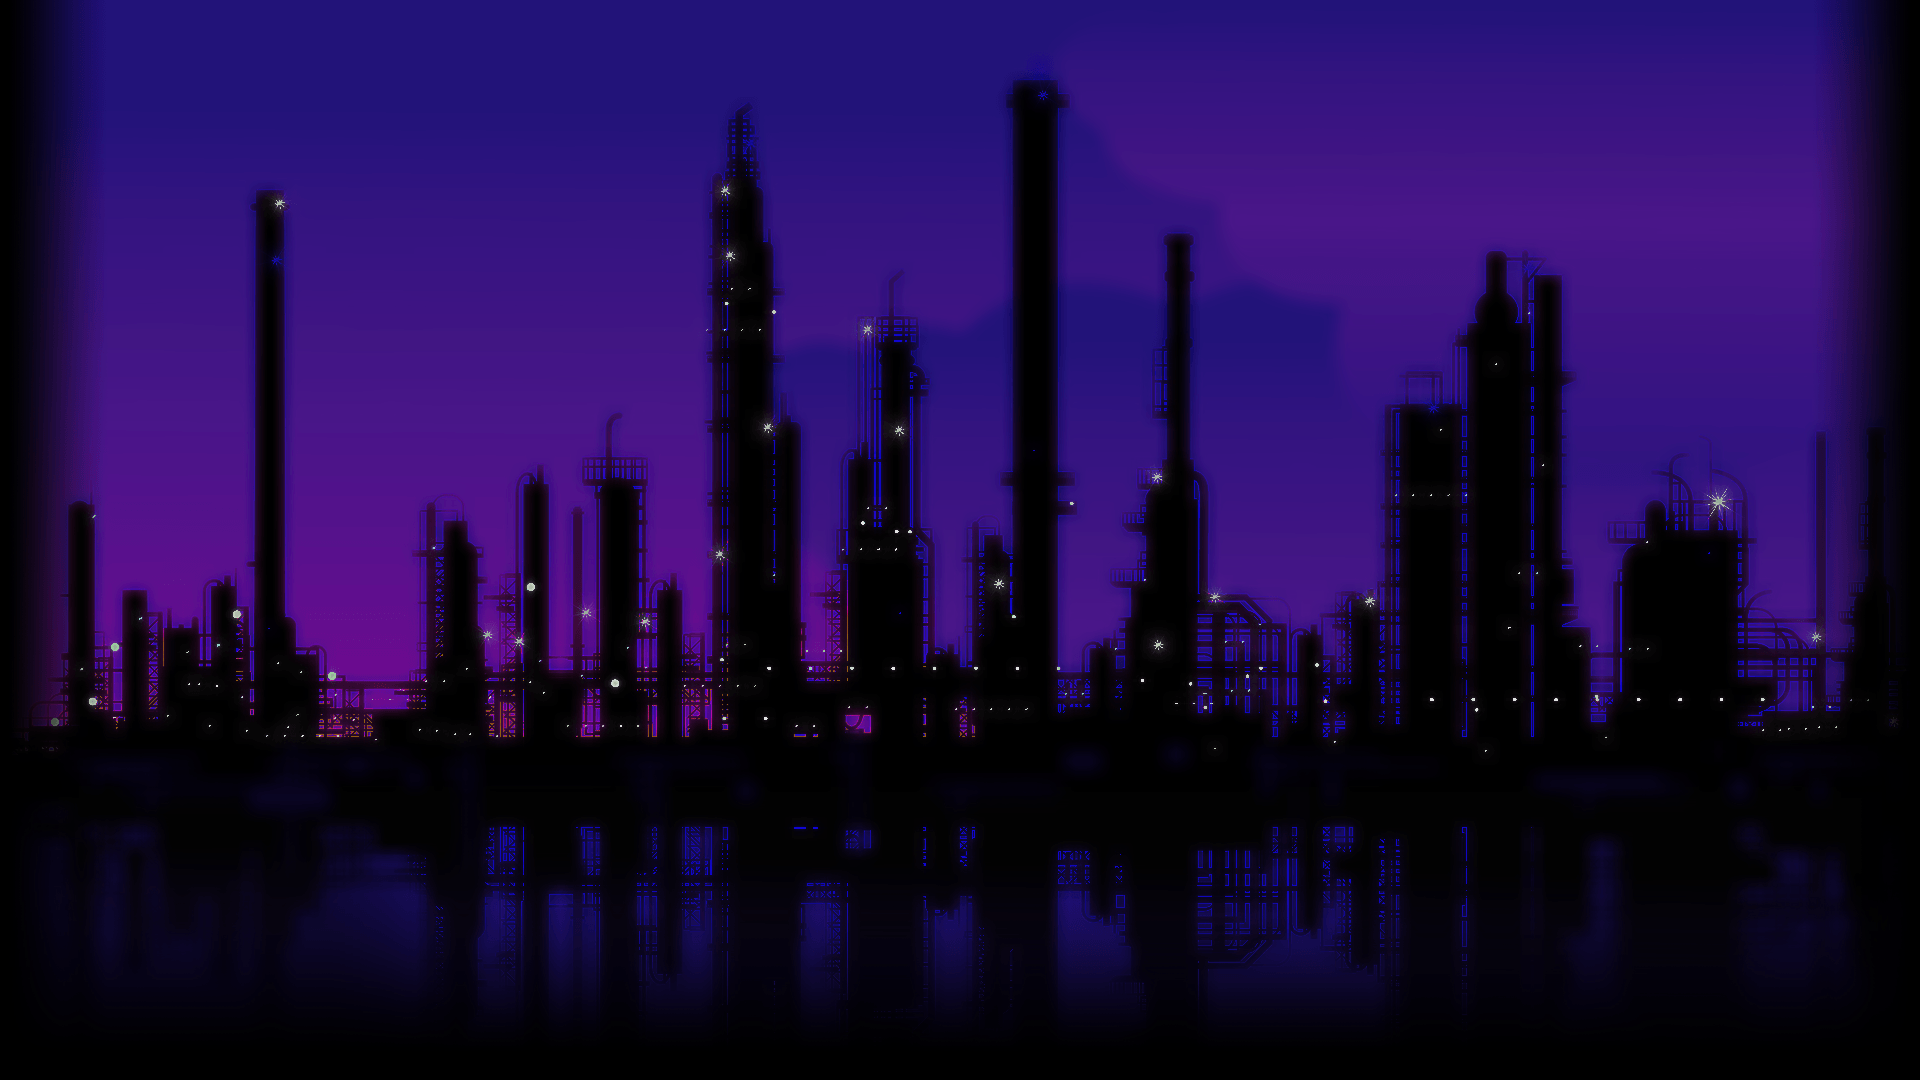 Purple PC Aesthetic Wallpapers - Wallpaper Cave